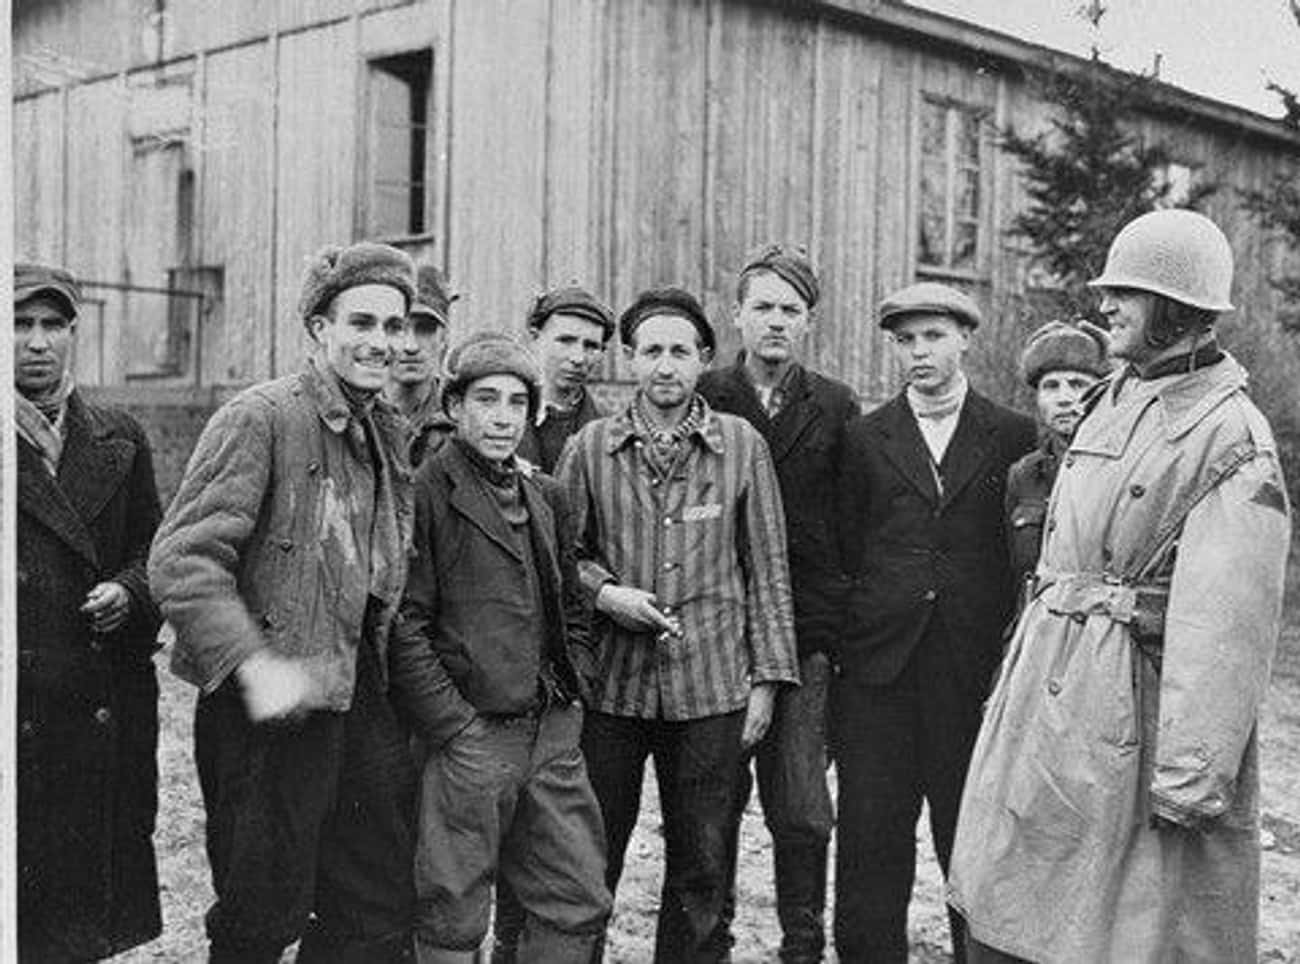 Survivors Pose With A Colonel At The Newly Liberated Ohrdruf Camp